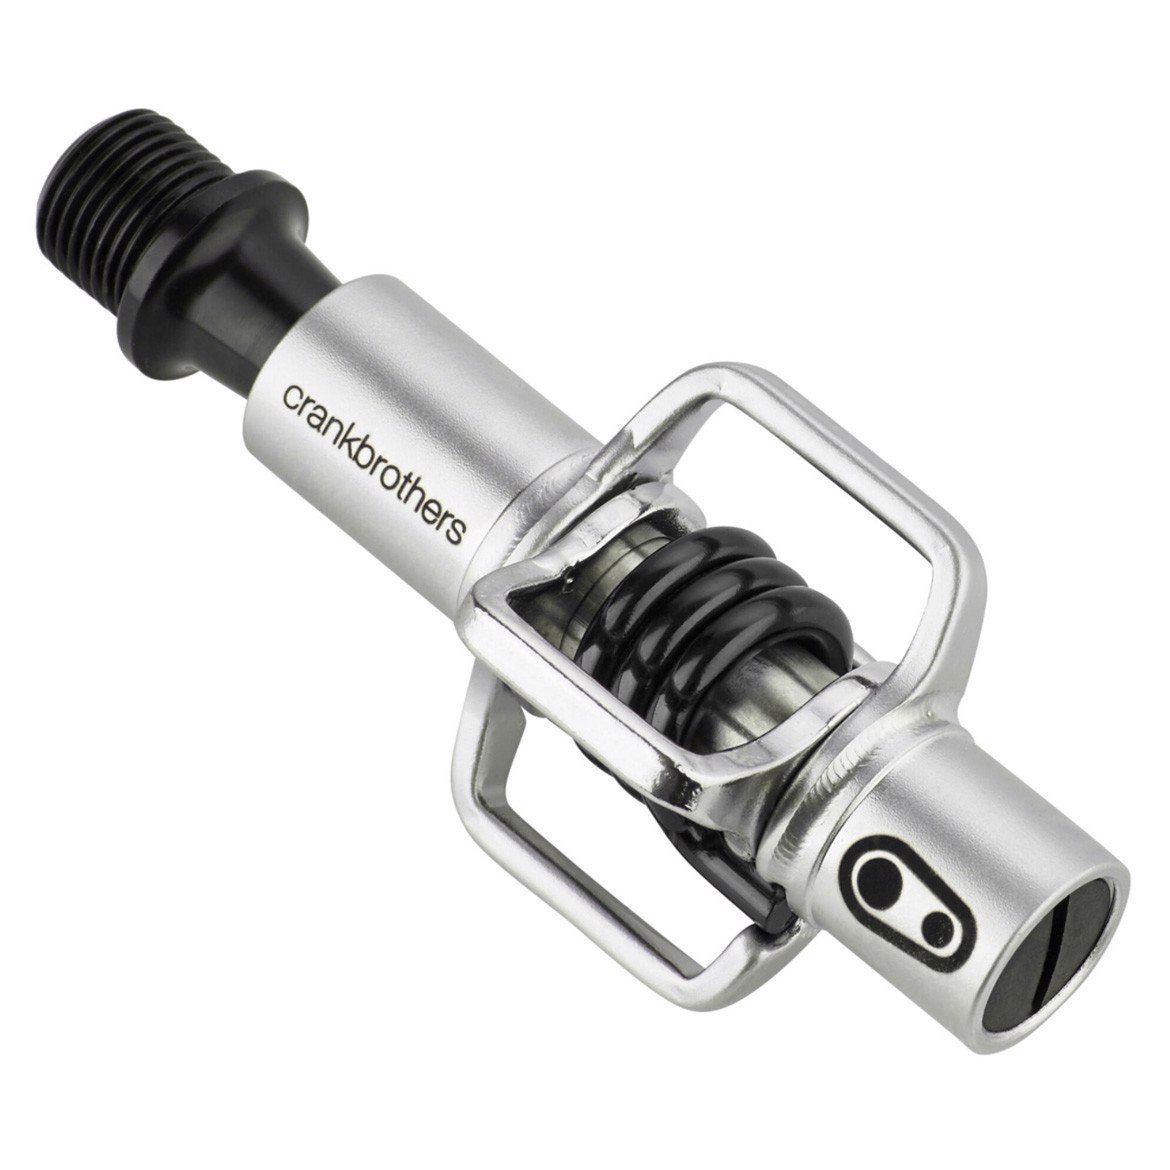 Pedal can Crankbrothers EggBeater 1 – 26 CYCLES